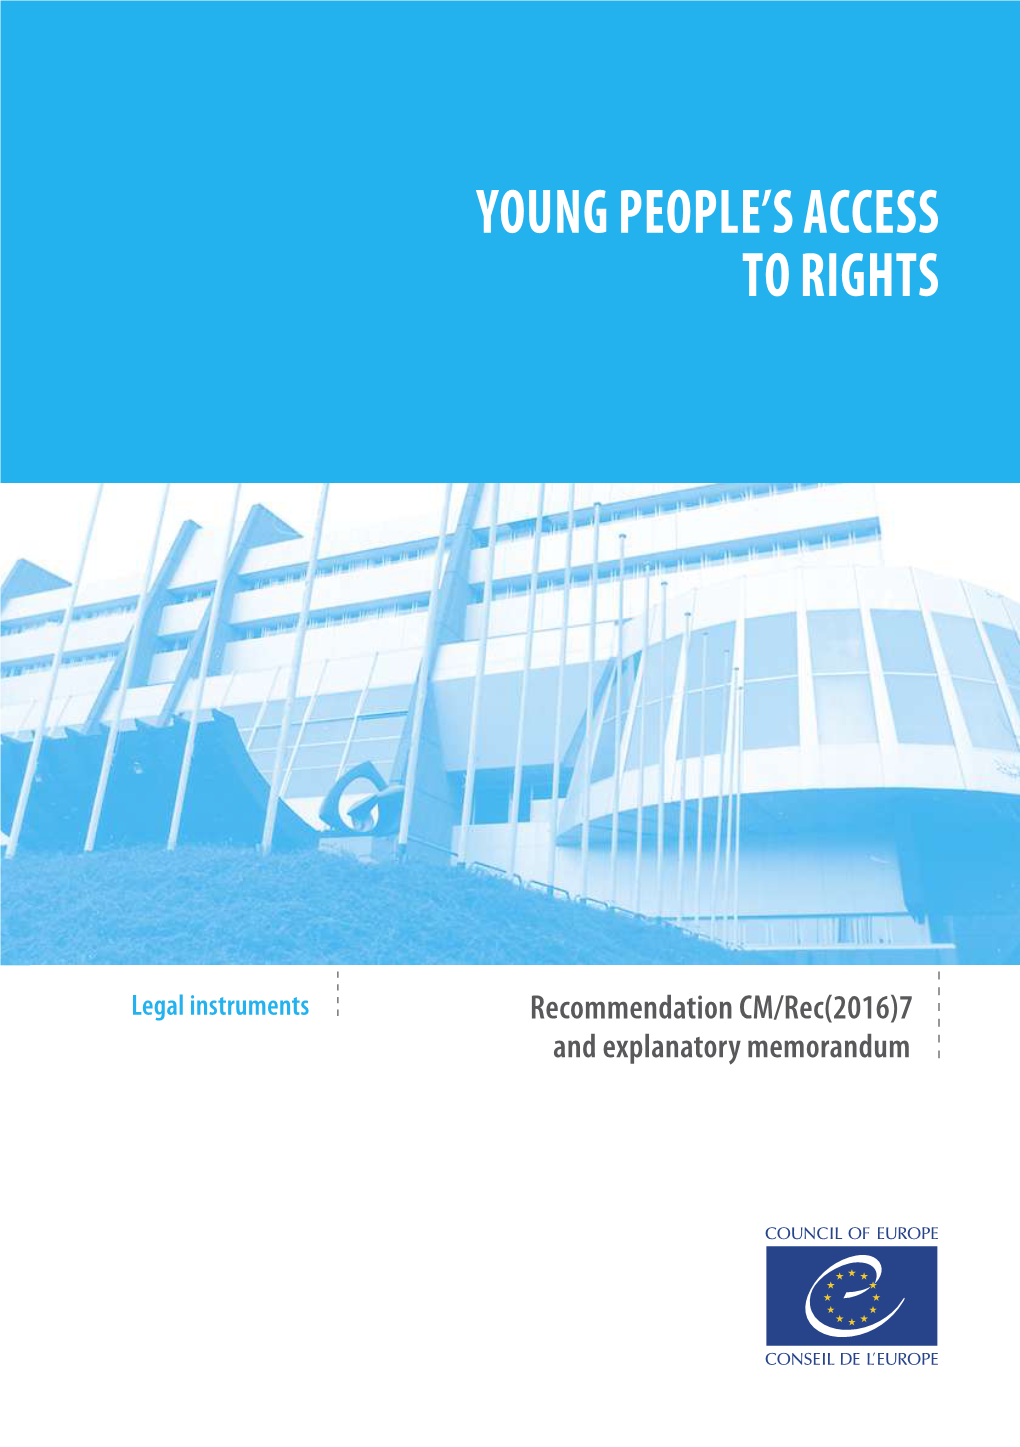 CM/Rec(2016)7 and Explanatory Memorandum YOUNG PEOPLE’S ACCESS to RIGHTS